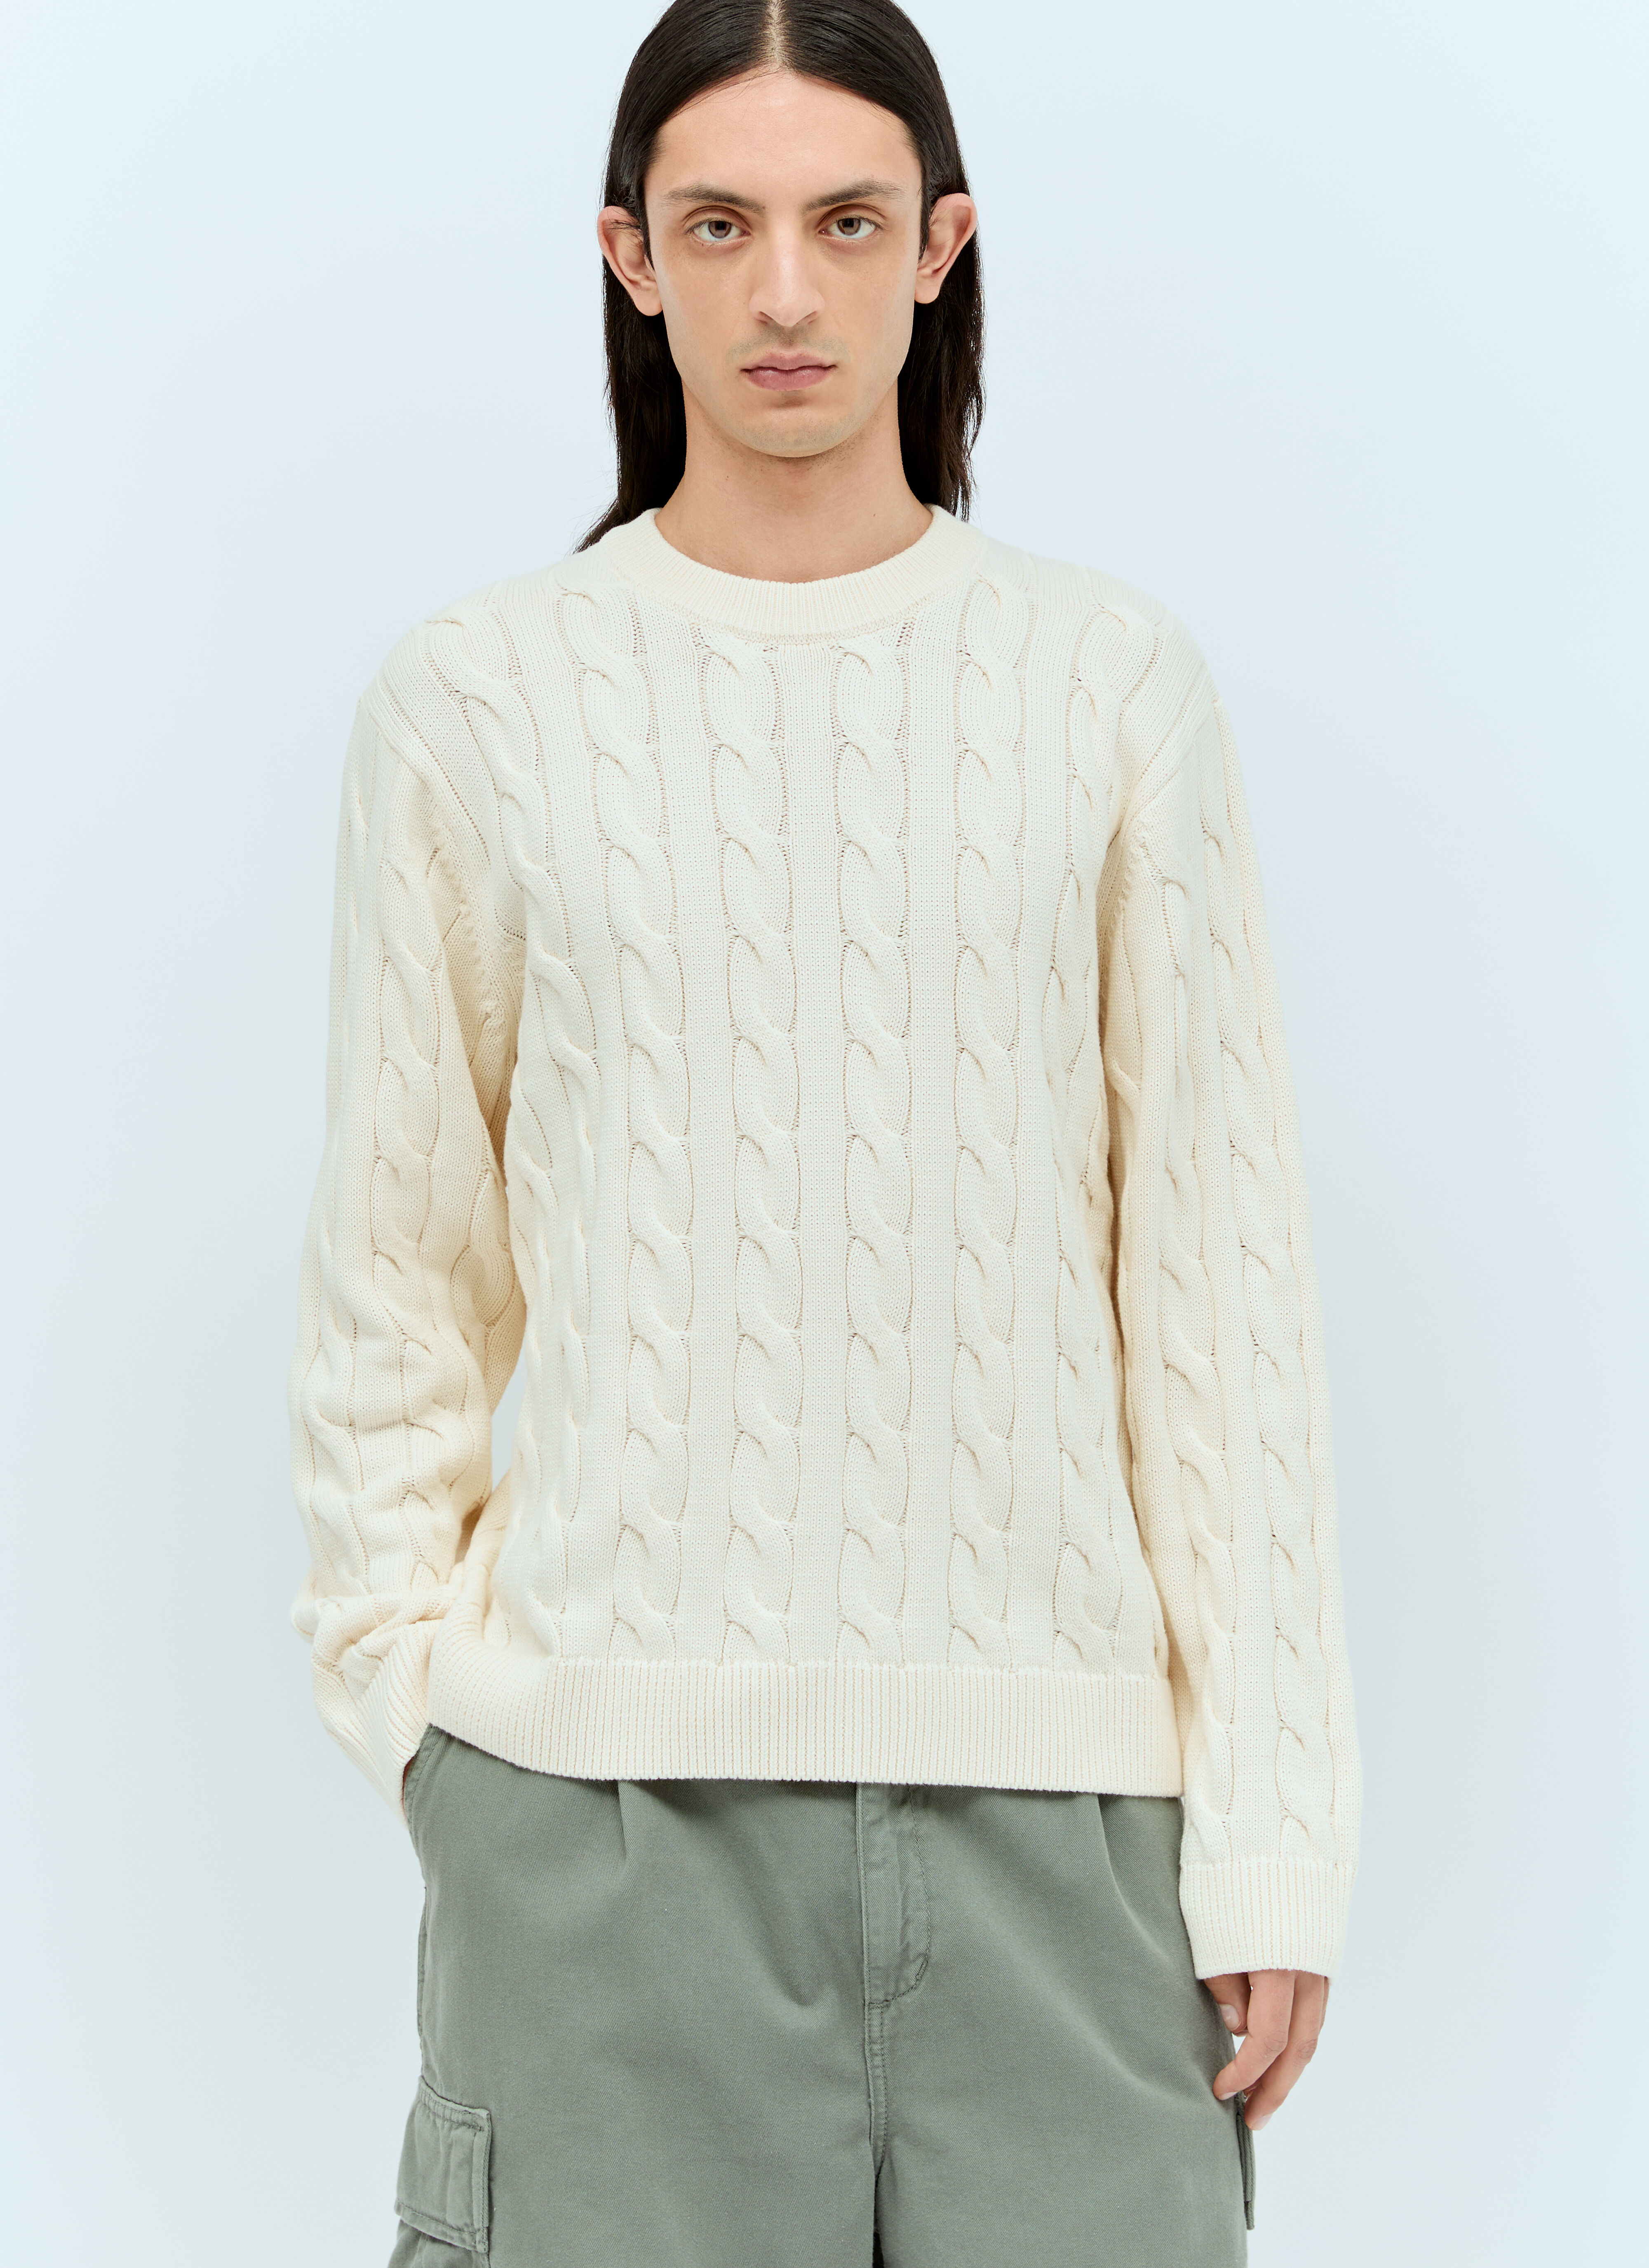 Acne Studios Cambell Sweater ピンク acn0156004